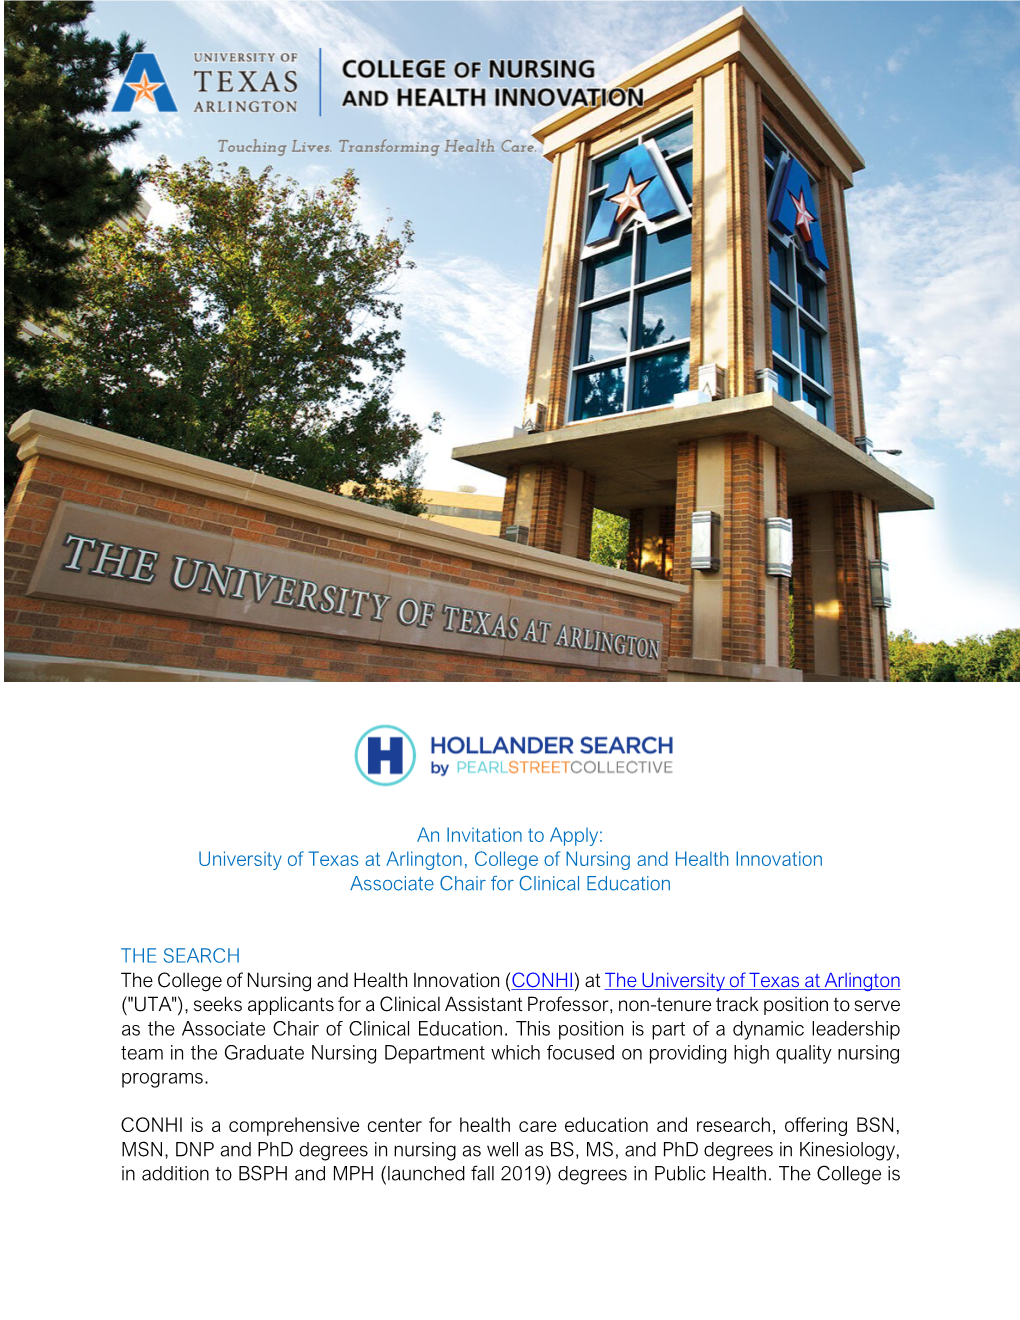 University of Texas at Arlington, College of Nursing and Health Innovation Associate Chair for Clinical Education